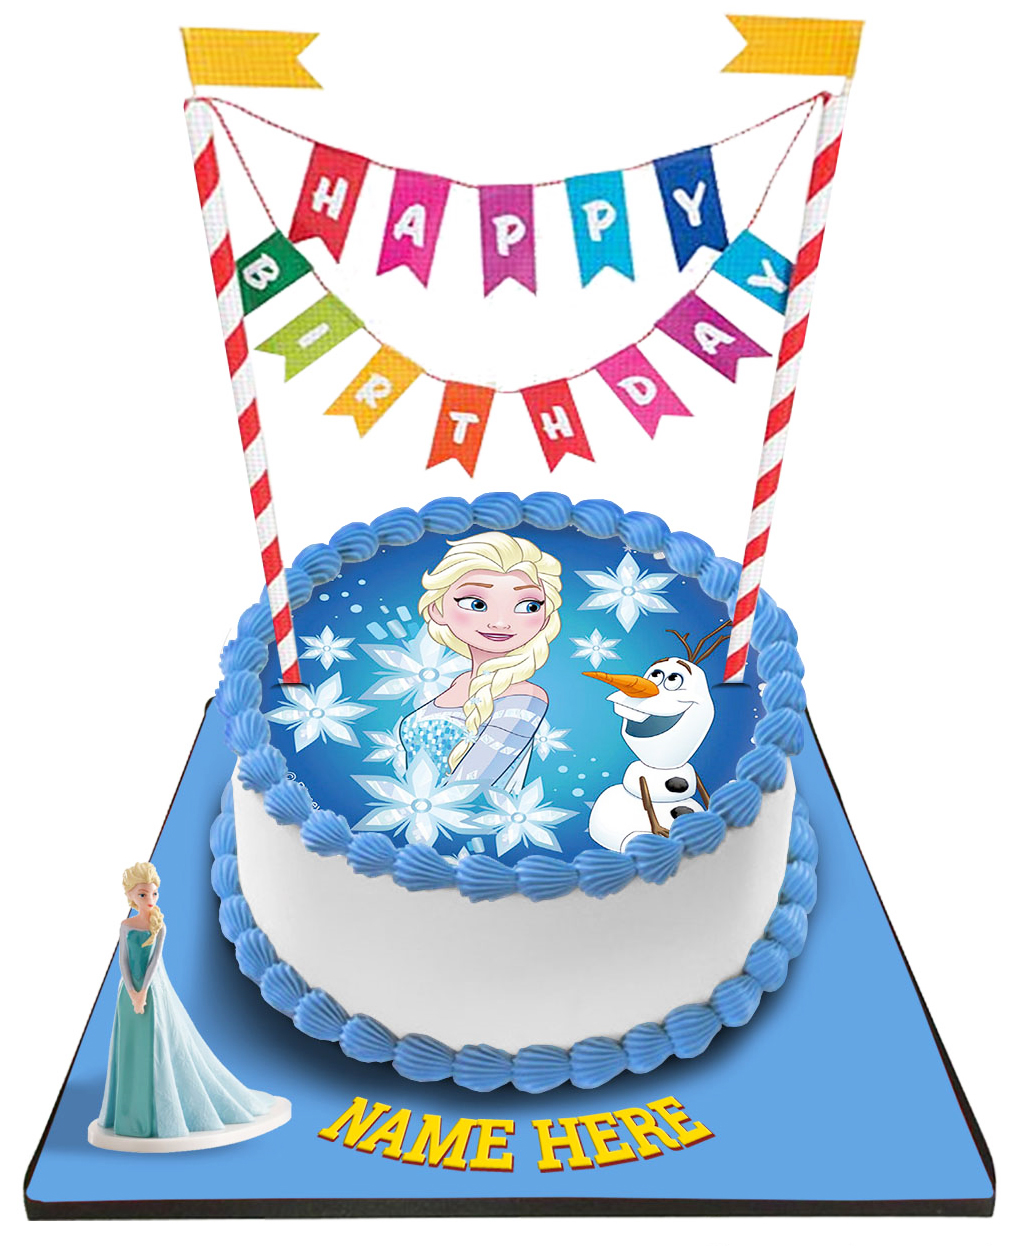 Disney Frozen Princess Cake With Happy Birthday Bunting &Topper